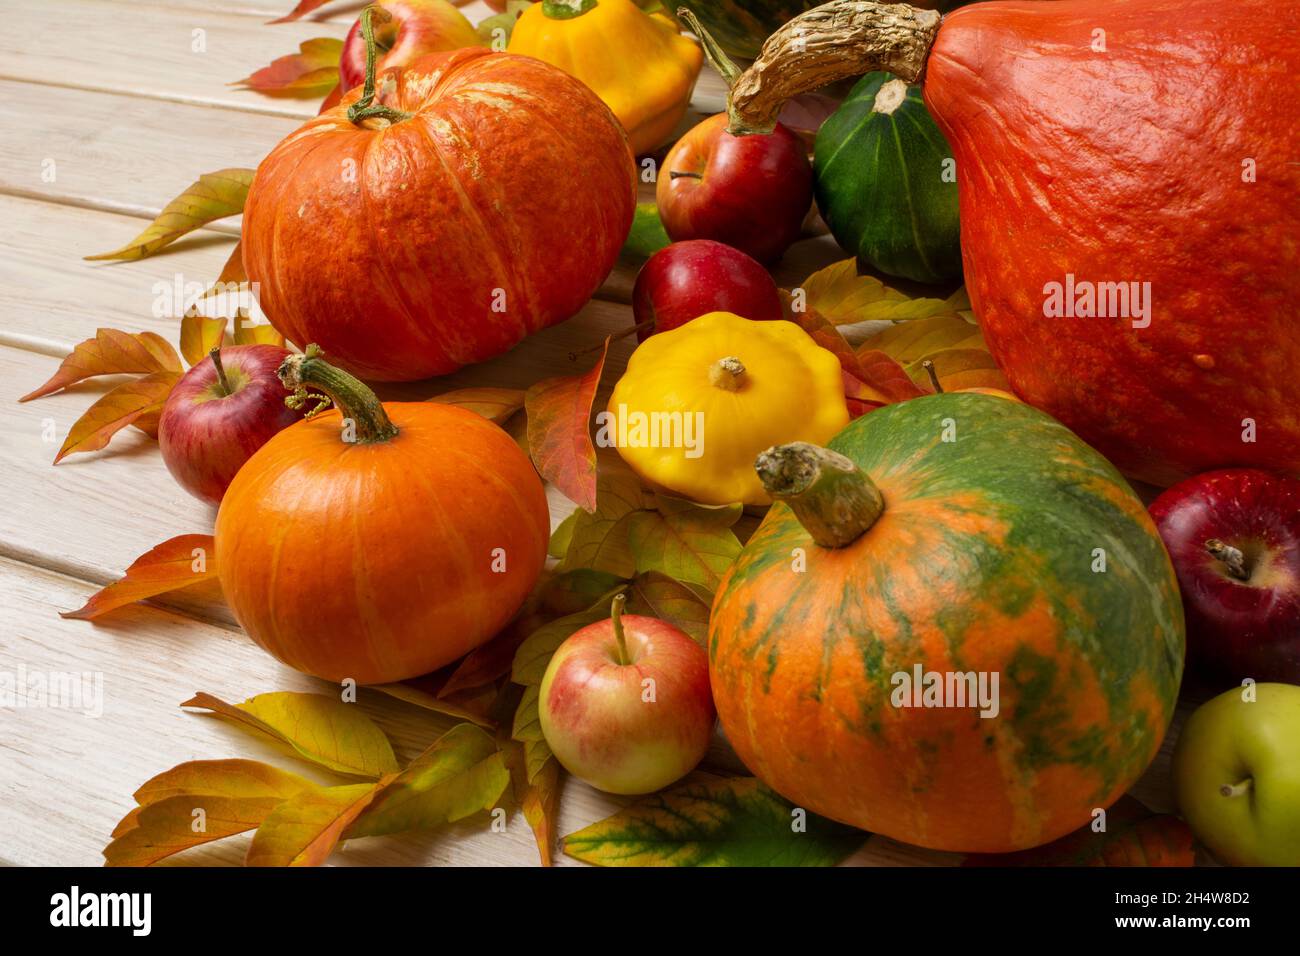 Thanksgiving centerpiece with red, green, orange, striped pumpkins, yellow squashes and apples on the white wooden background Stock Photo